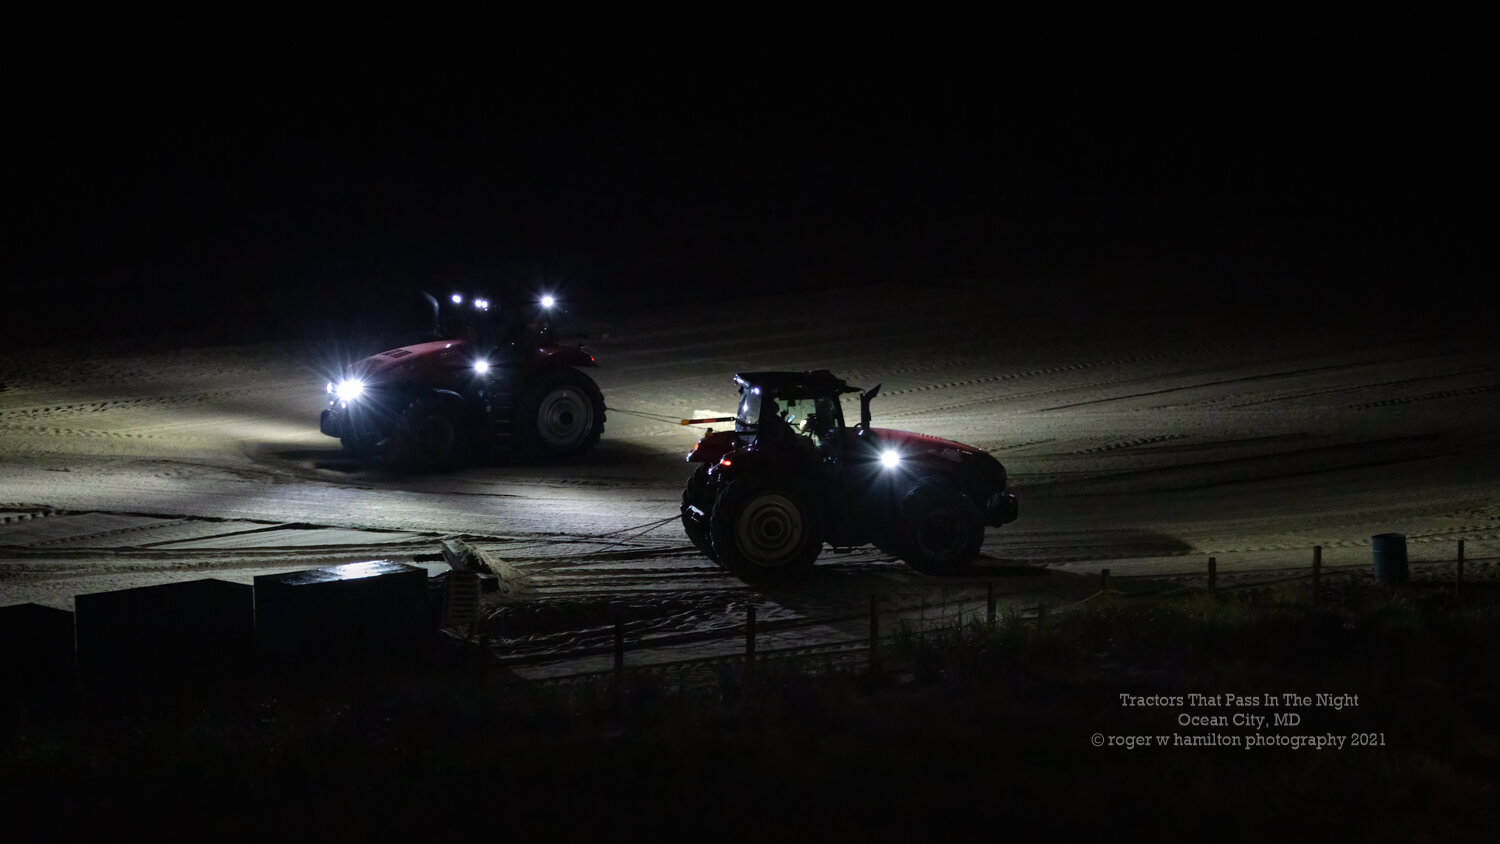 Tractors that pass in the night